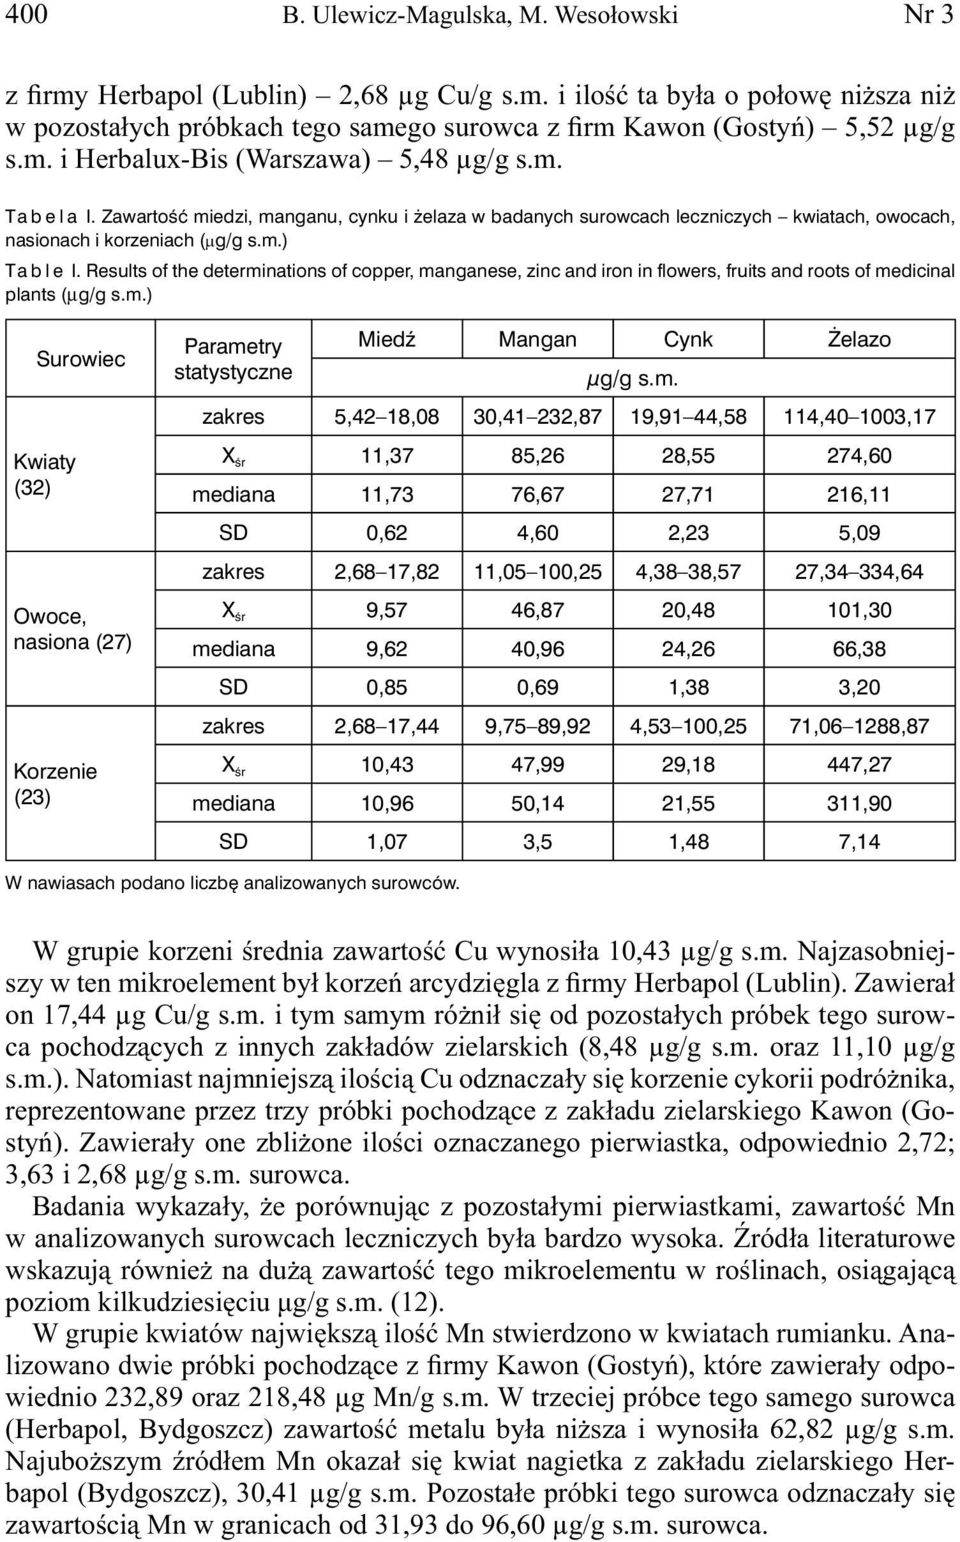 Results of the determinations of copper, manganese, zinc and iron in flowers, fruits and roots of medicinal plants ( g/g s.m.) Surowiec Kwiaty (32) Owoce, nasiona (27) Korzenie (23) Parametry statystyczne Miedź Mangan Cynk Żelazo μg/g s.